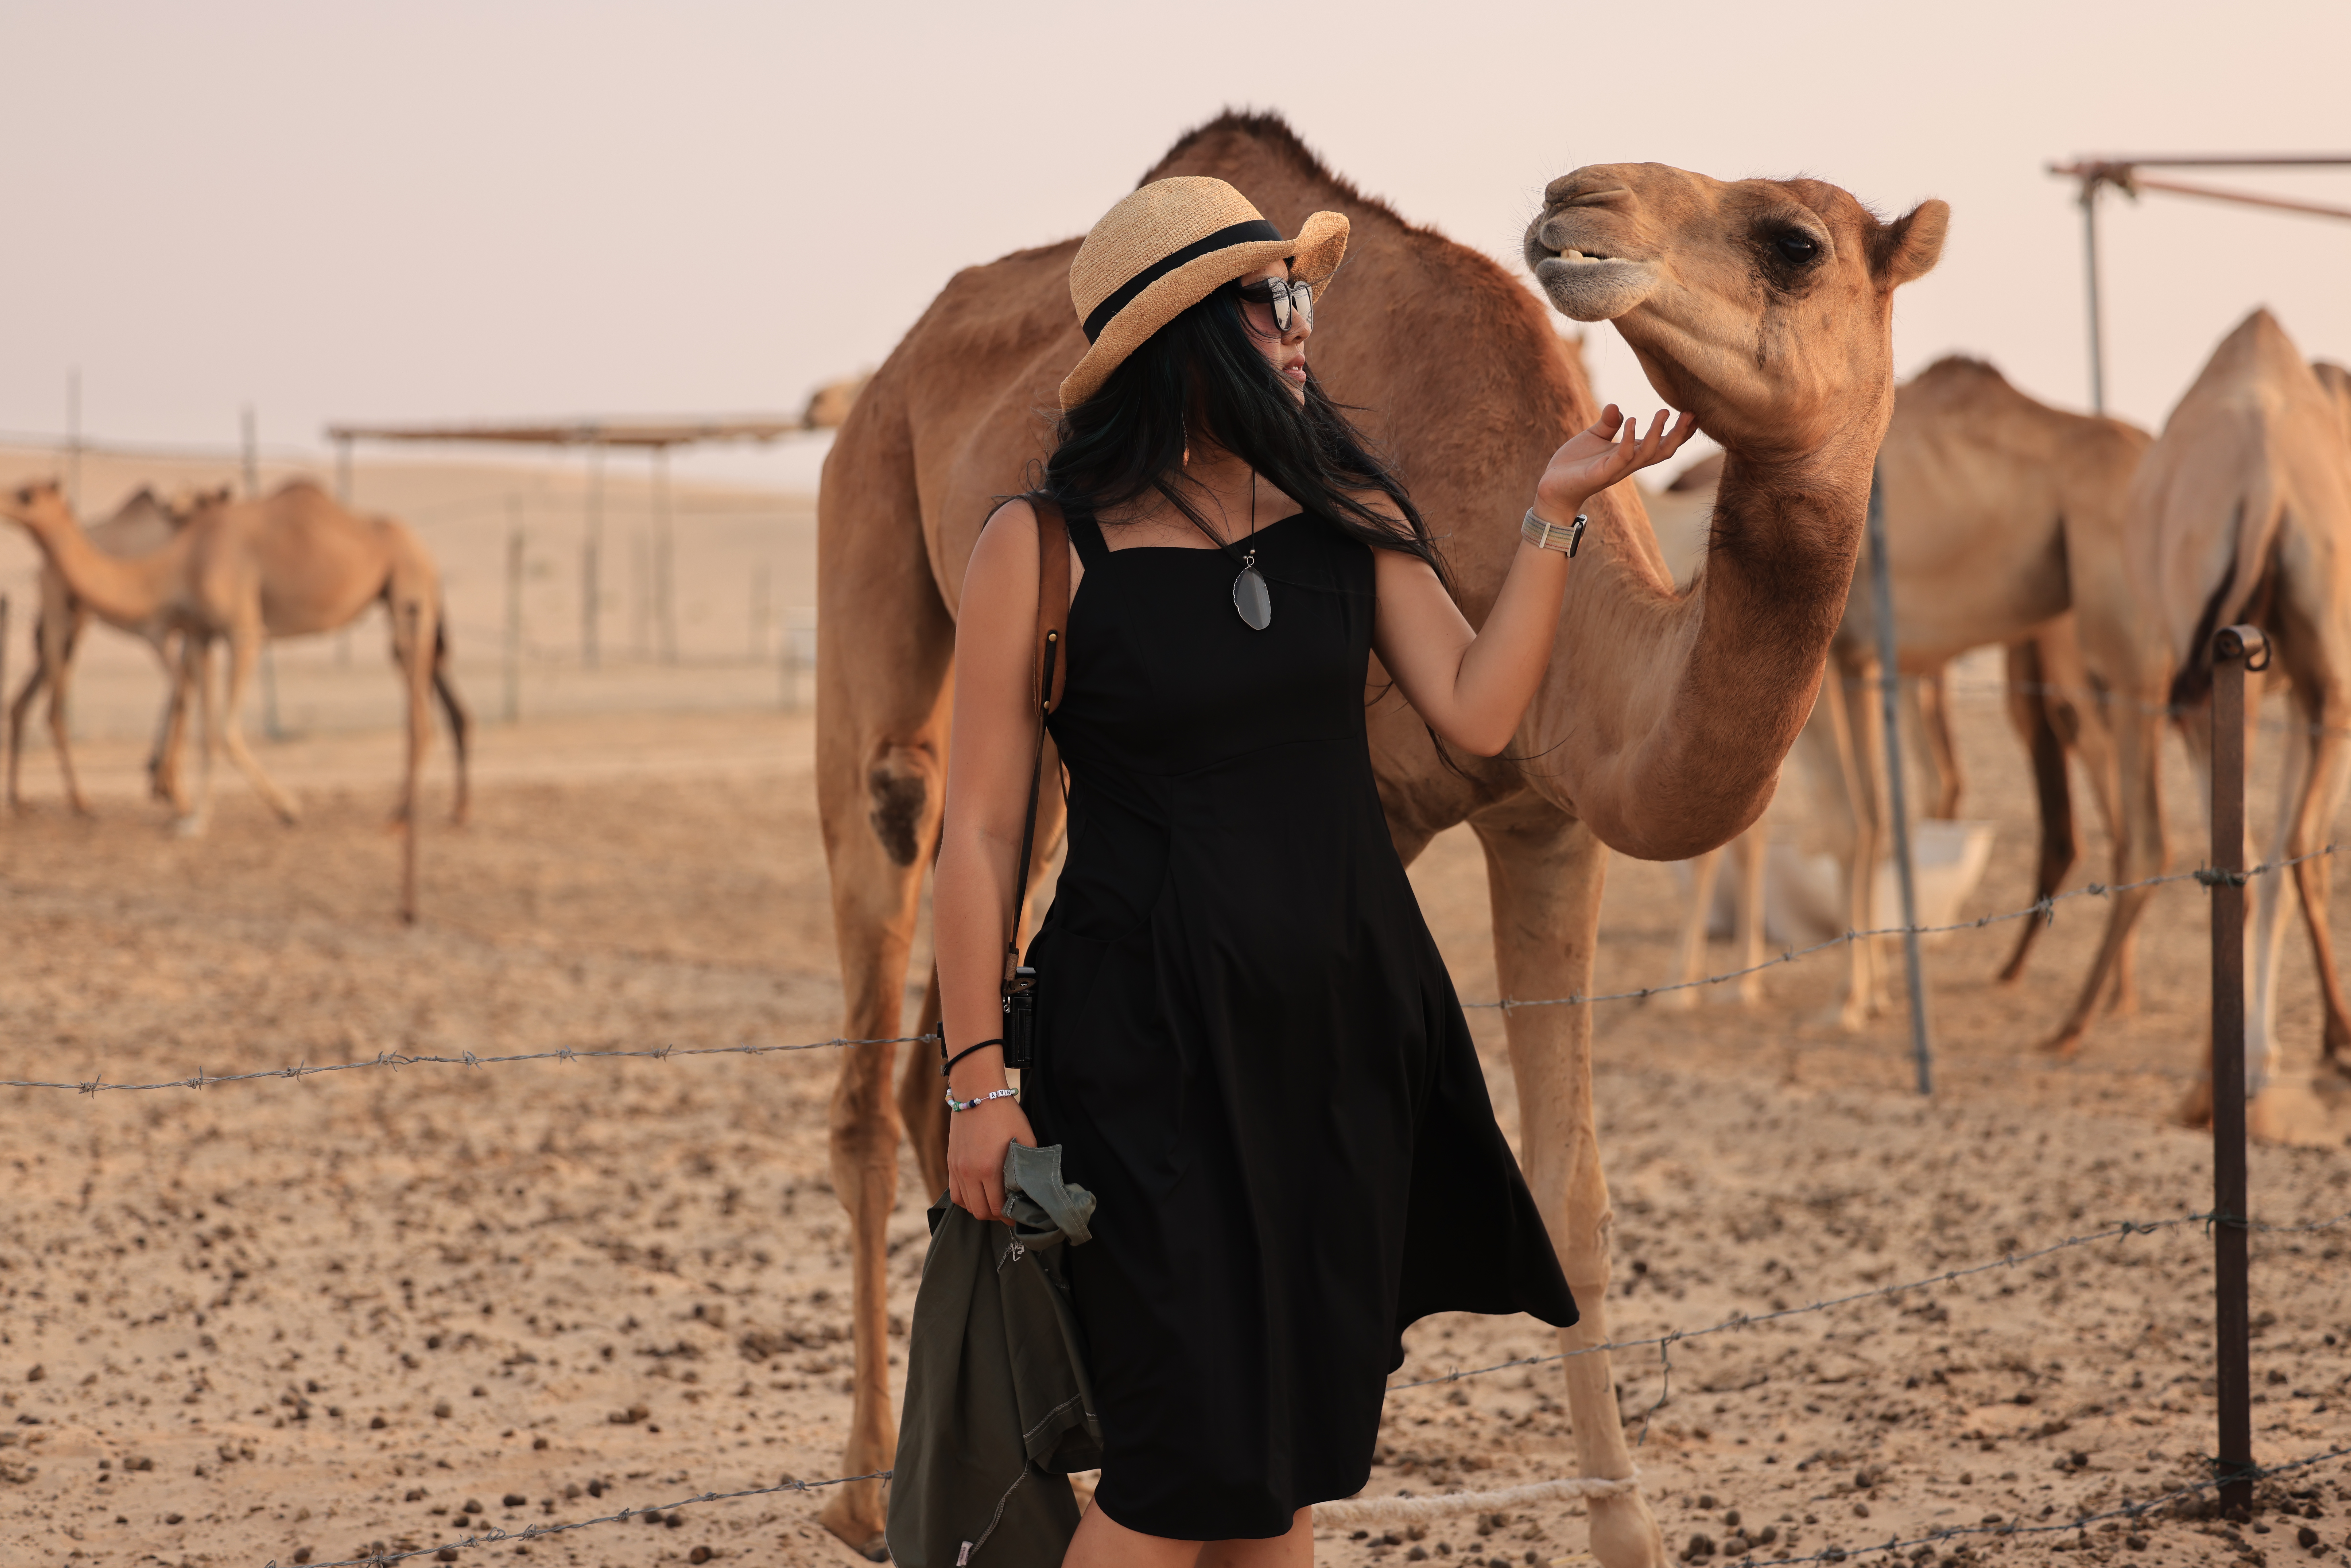 Student Ray Qian standing next to a camel in a desert.